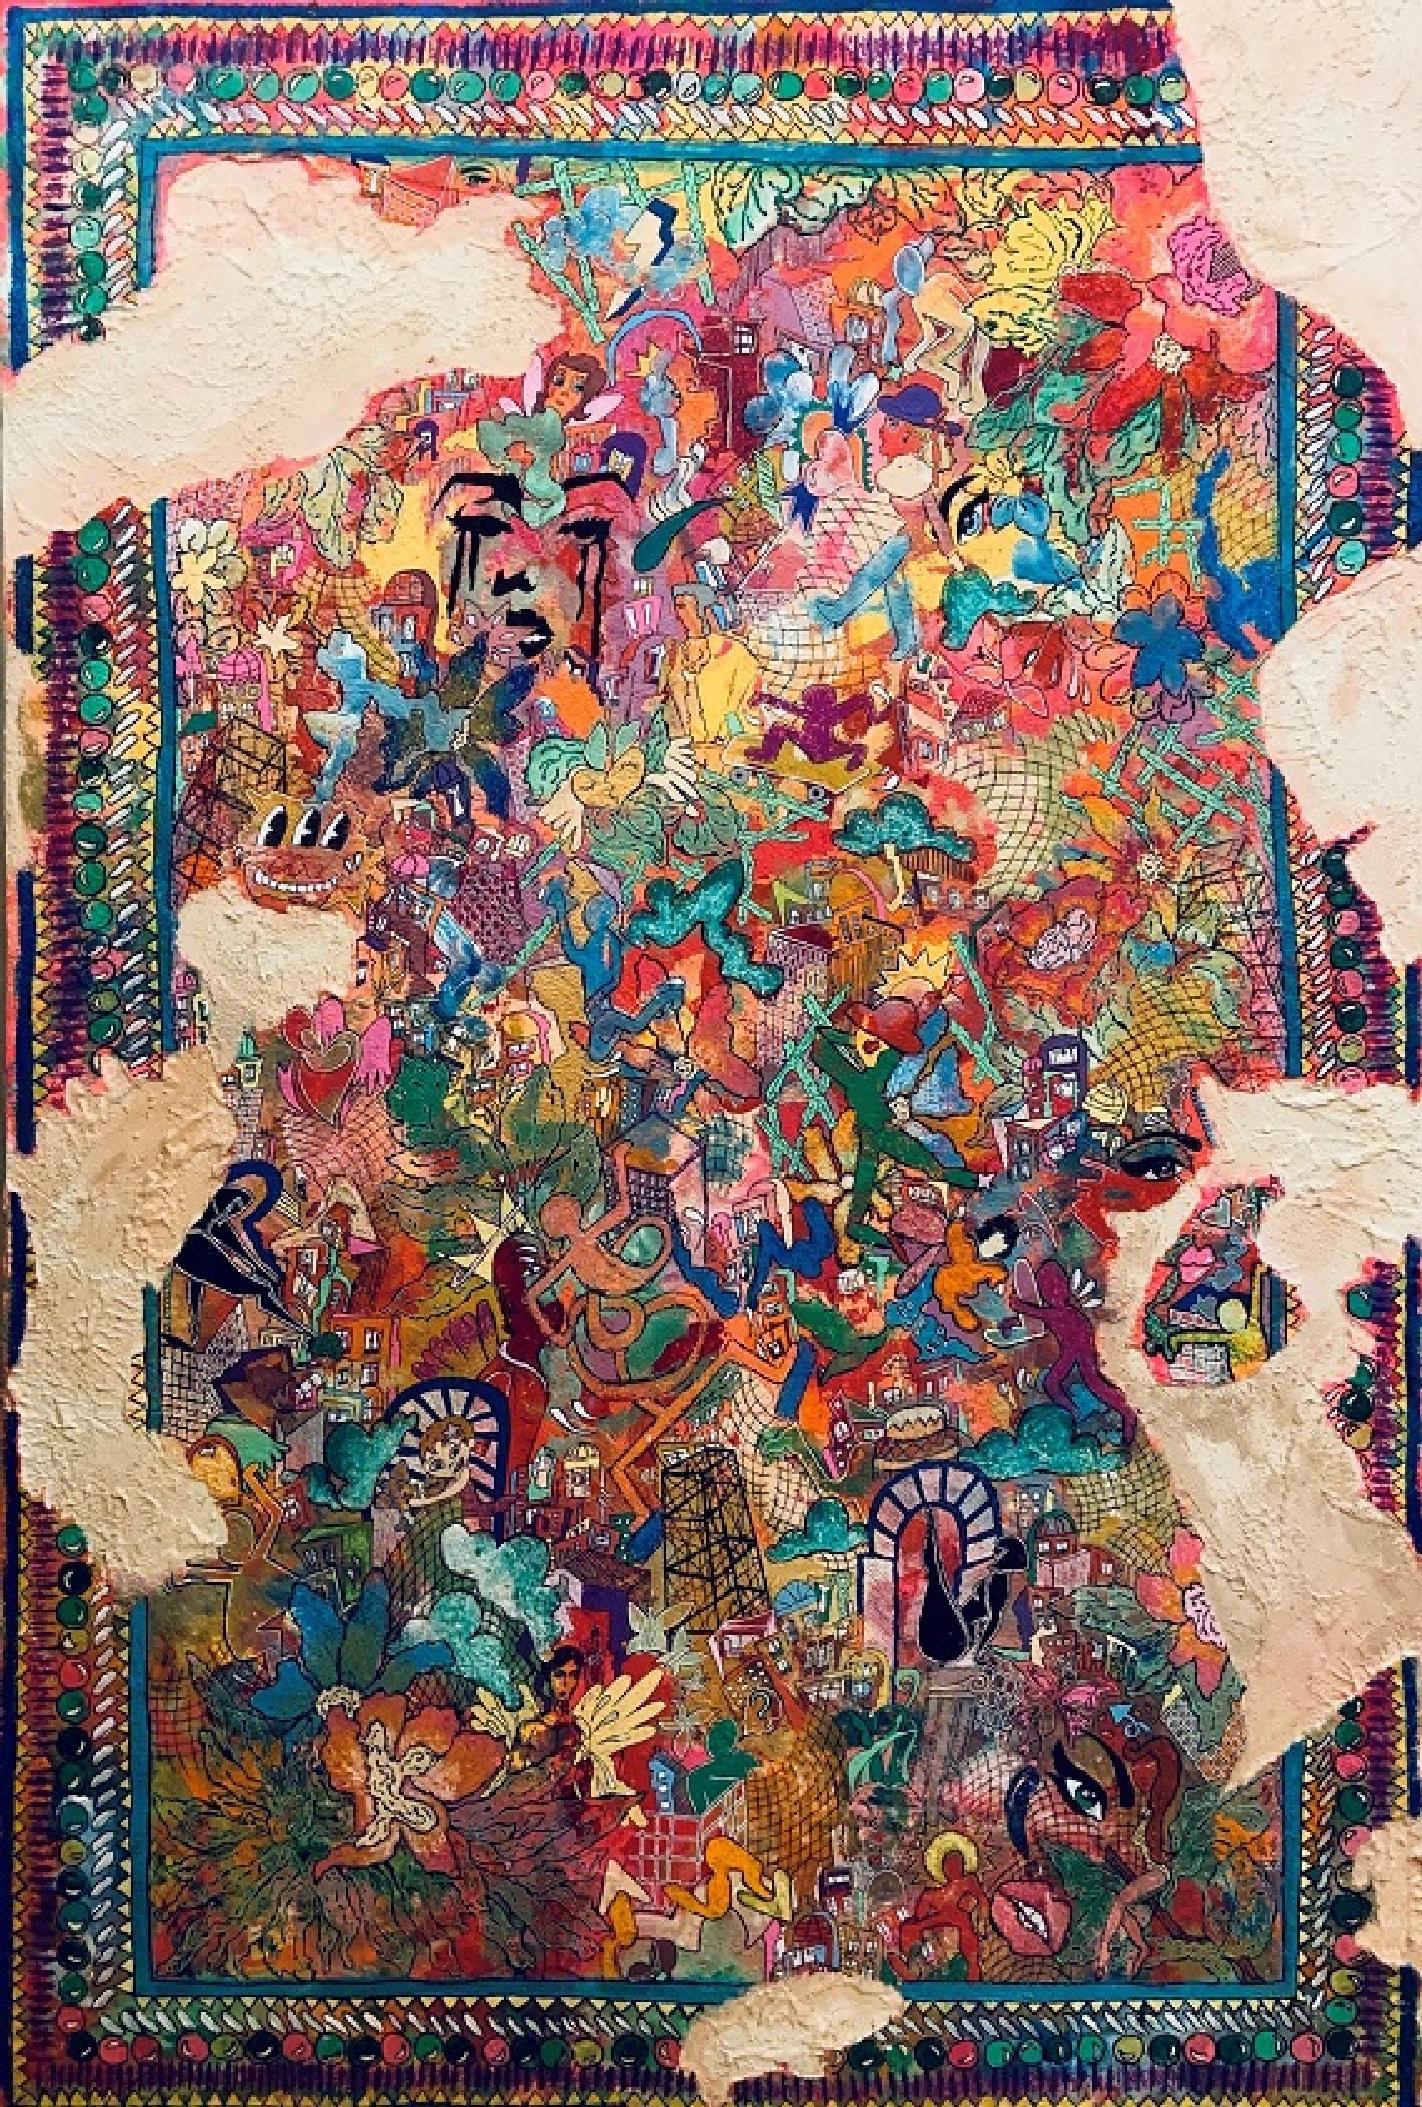 "Pink Circus" Mixed Media Painting 59" x 39" inch by Kinda Adly